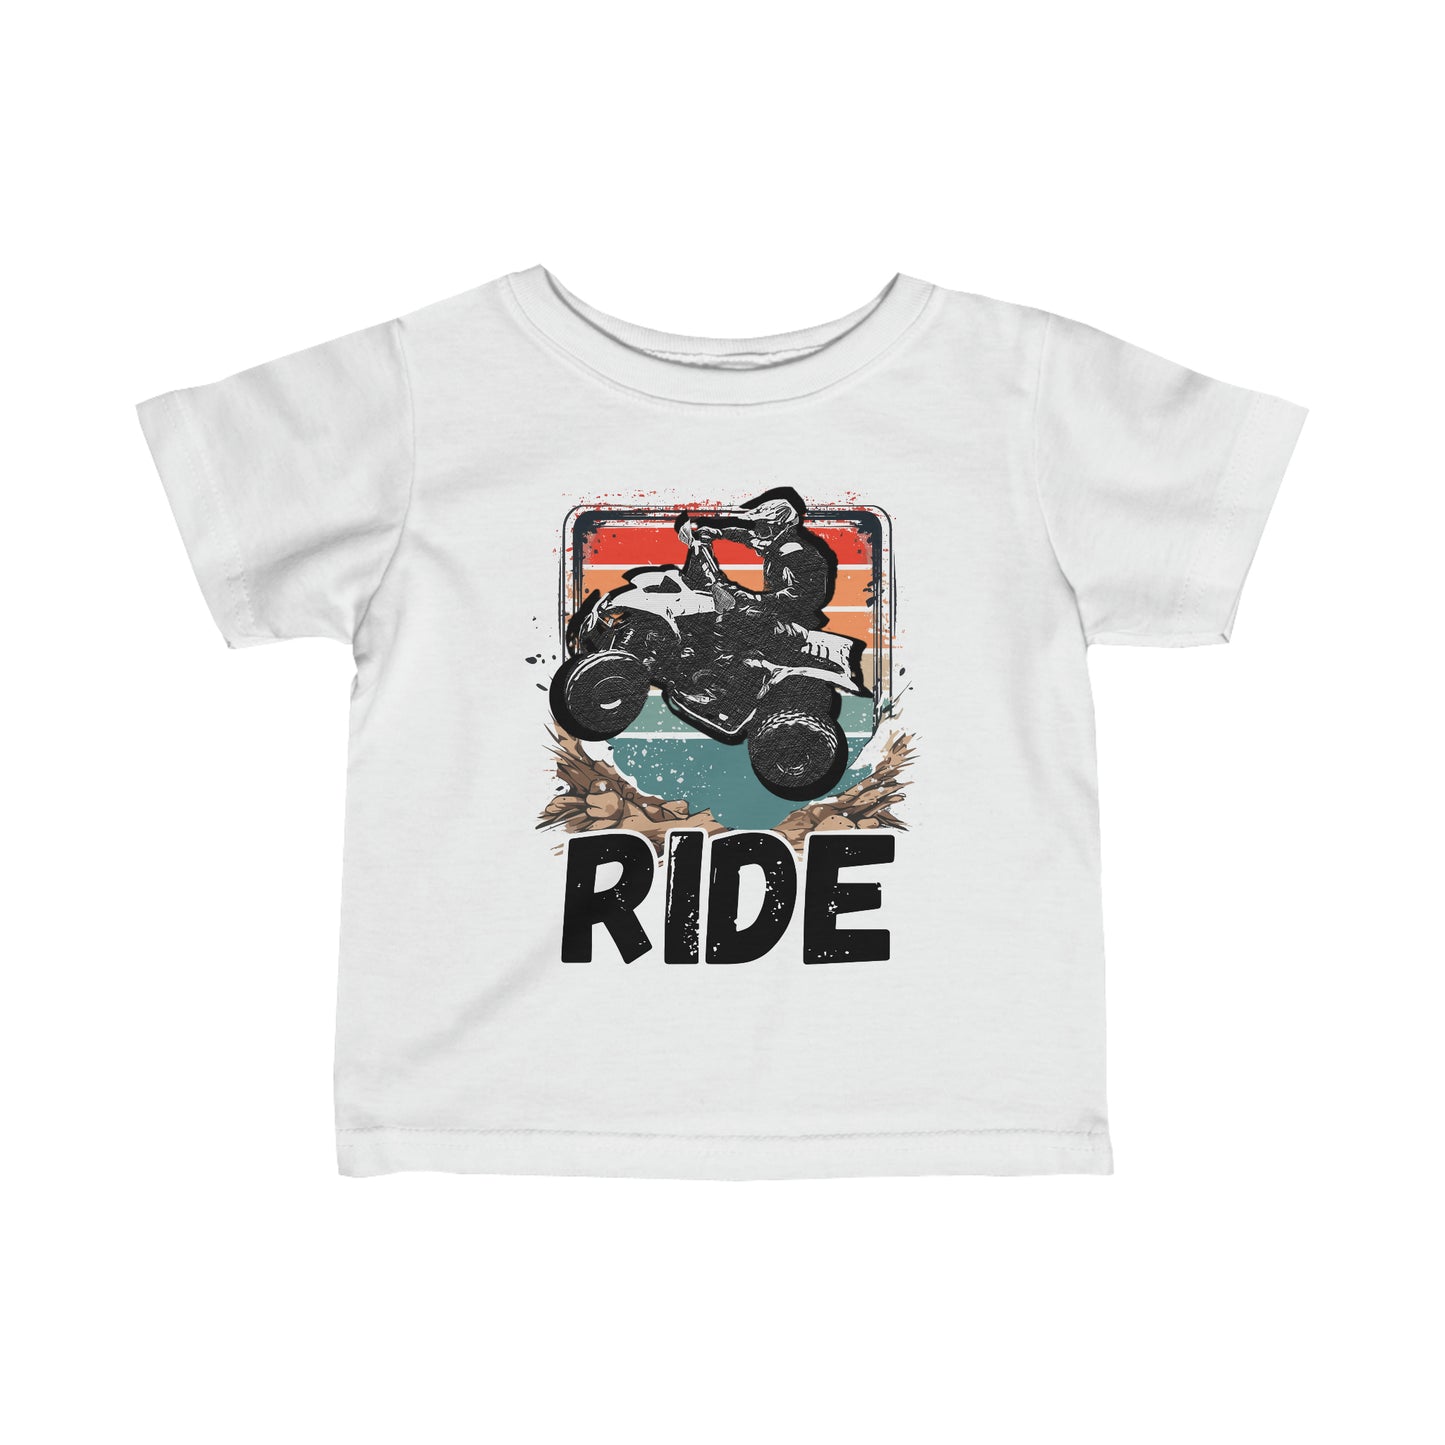 Infant Riding Shirt | Retro Four Wheeler with RIDE letters | Small Child Rabbit Skins Soft Cotton Tee | ATV shirt for toddlers | Four wheeler shirt for kids